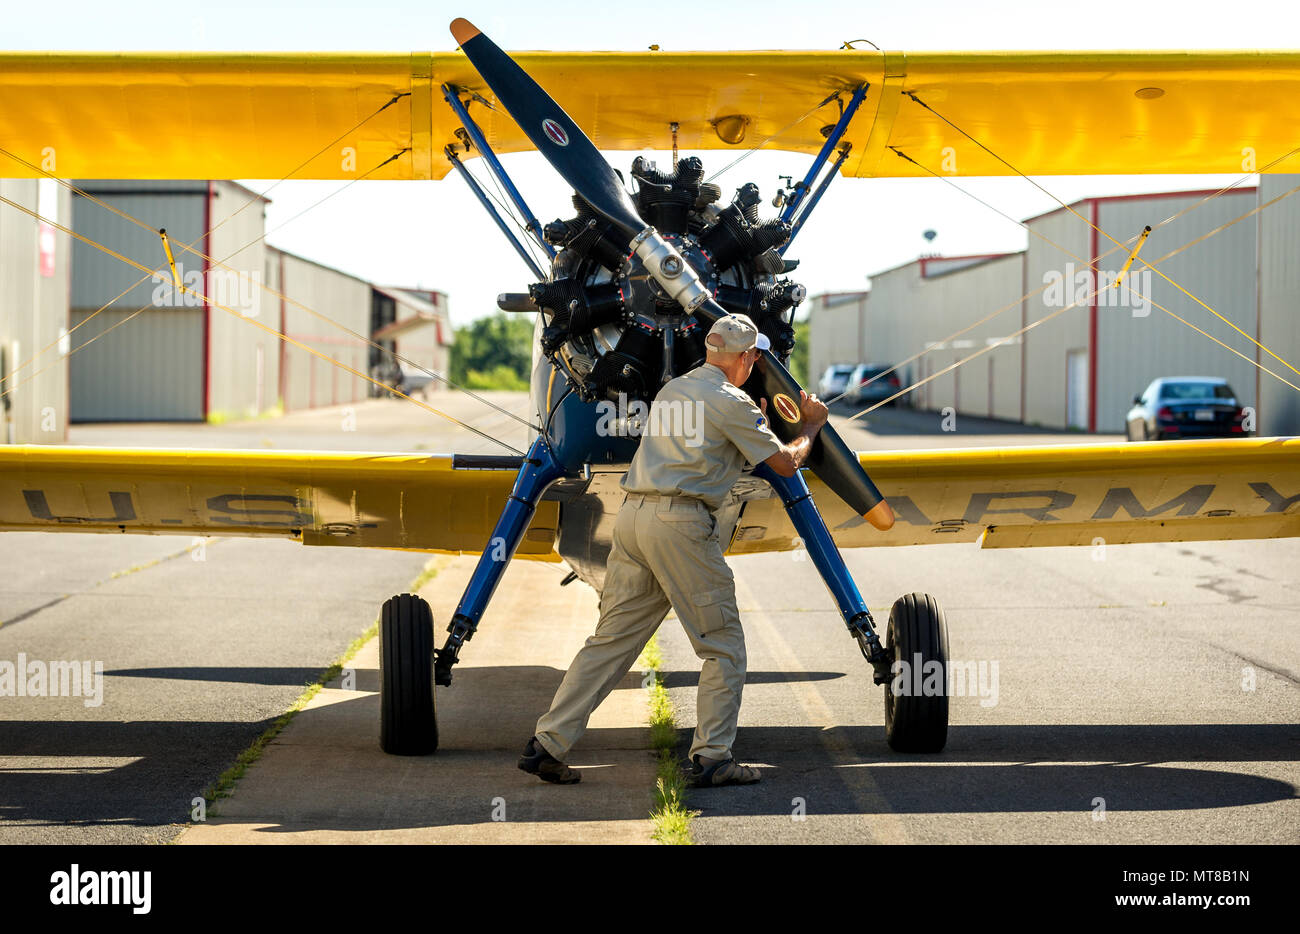 First Sgt. David Brown, Air Force Reserve, prepares his PT-17 Stearman biplane for takeoff before flying with Al Tucker Jr., 96, from the Warrenton-Fauquier Airport in Warrenton Va., to the Flying Circus Aerodrome and Airshow in Bealeton, Va., Jul. 30, 2017. (U.S. Air Force photo by J.M. Eddins Jr.) Stock Photo